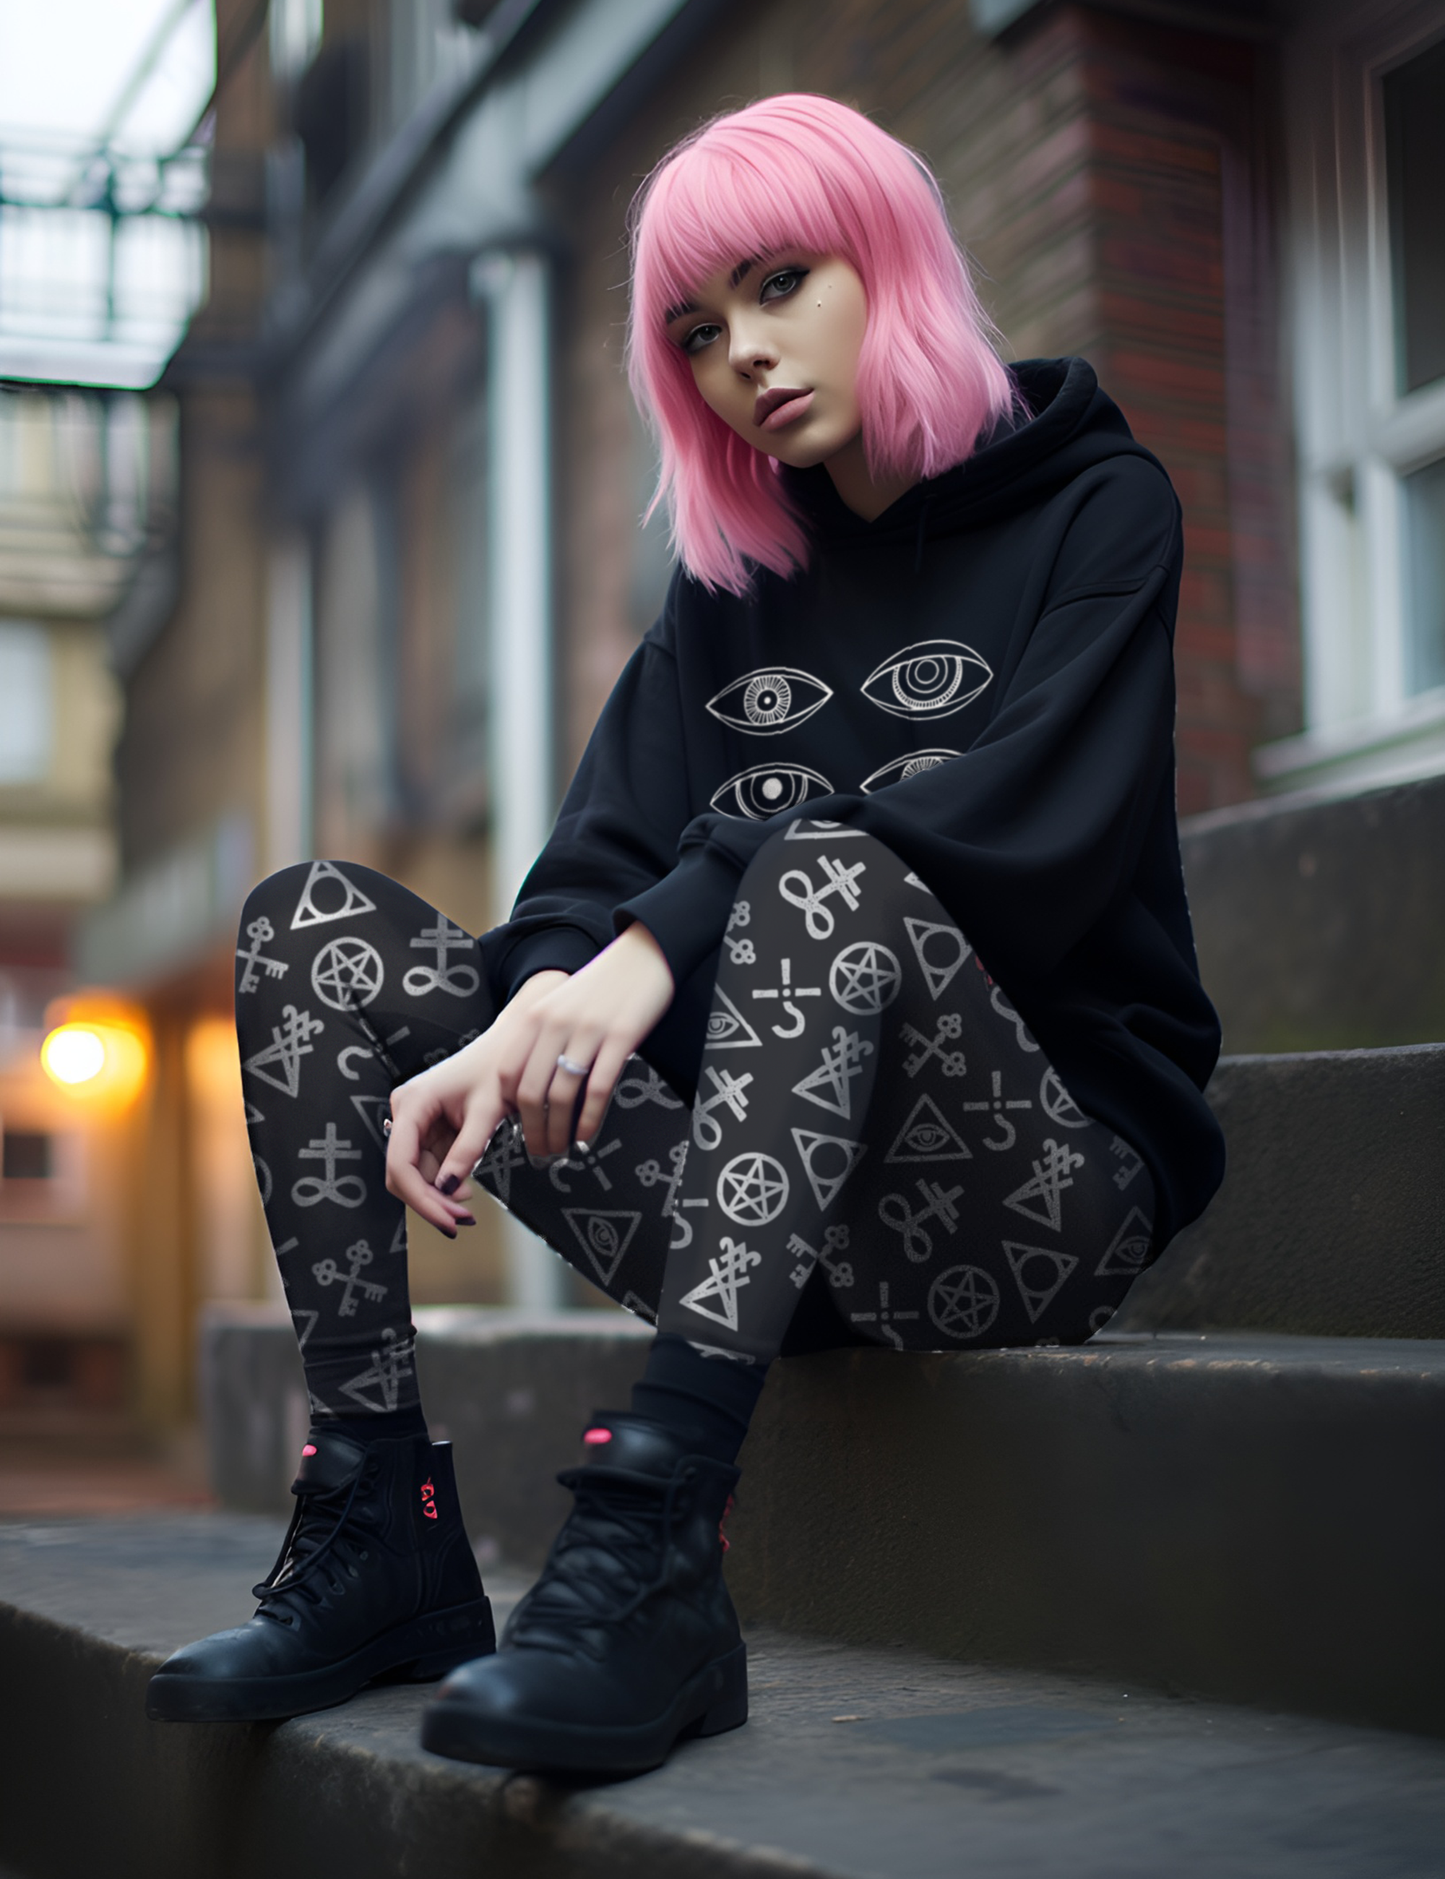 Occult Symbols Plus Size Witchy Clothing Leggings